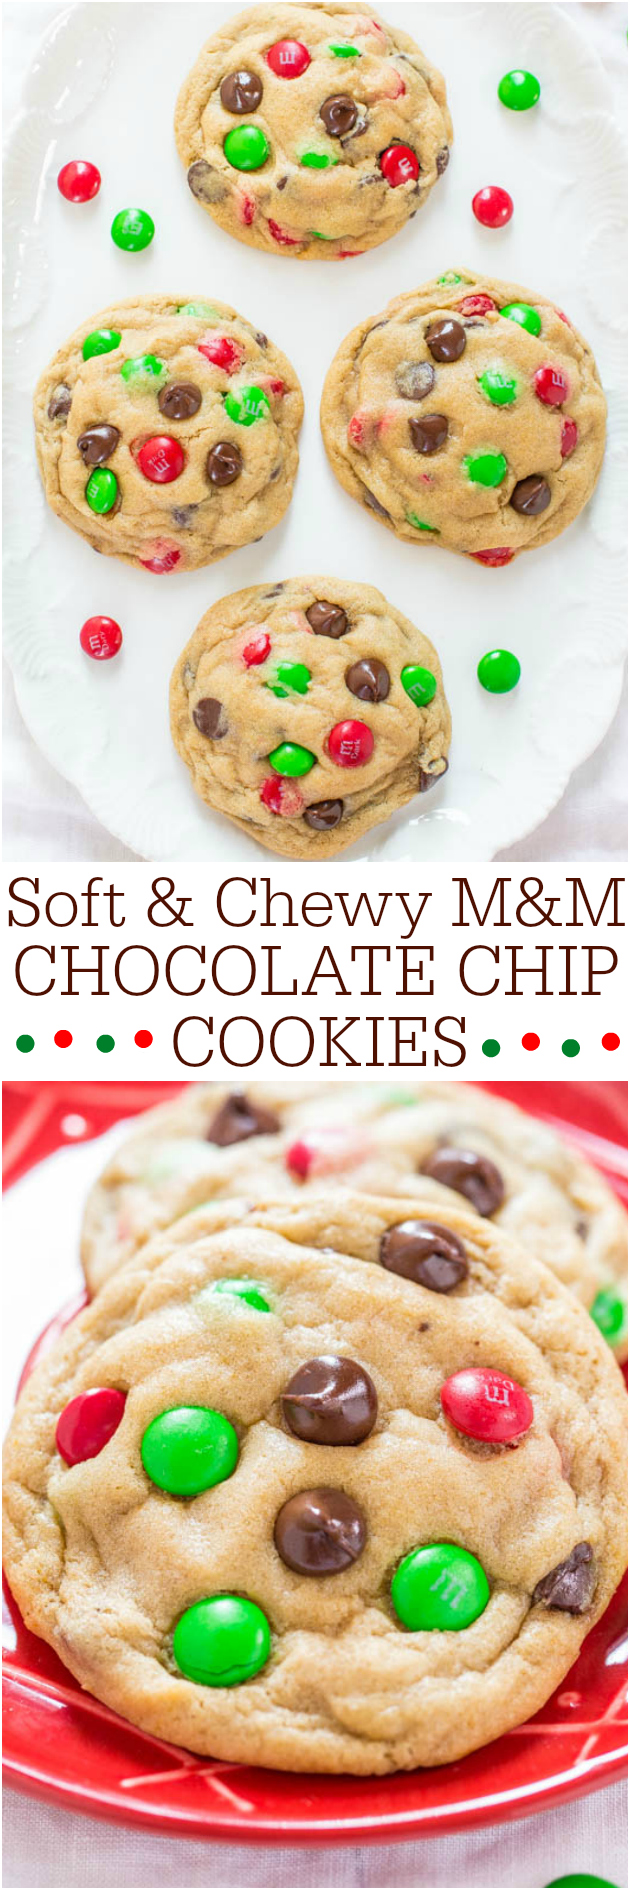 Soft and Chewy Chocolate Chip M&M's Cookies — If you're looking for a new M&M's cookie recipe, this is THE ONE! Soft, buttery, and irresistible M&M's Christmas cookies! 